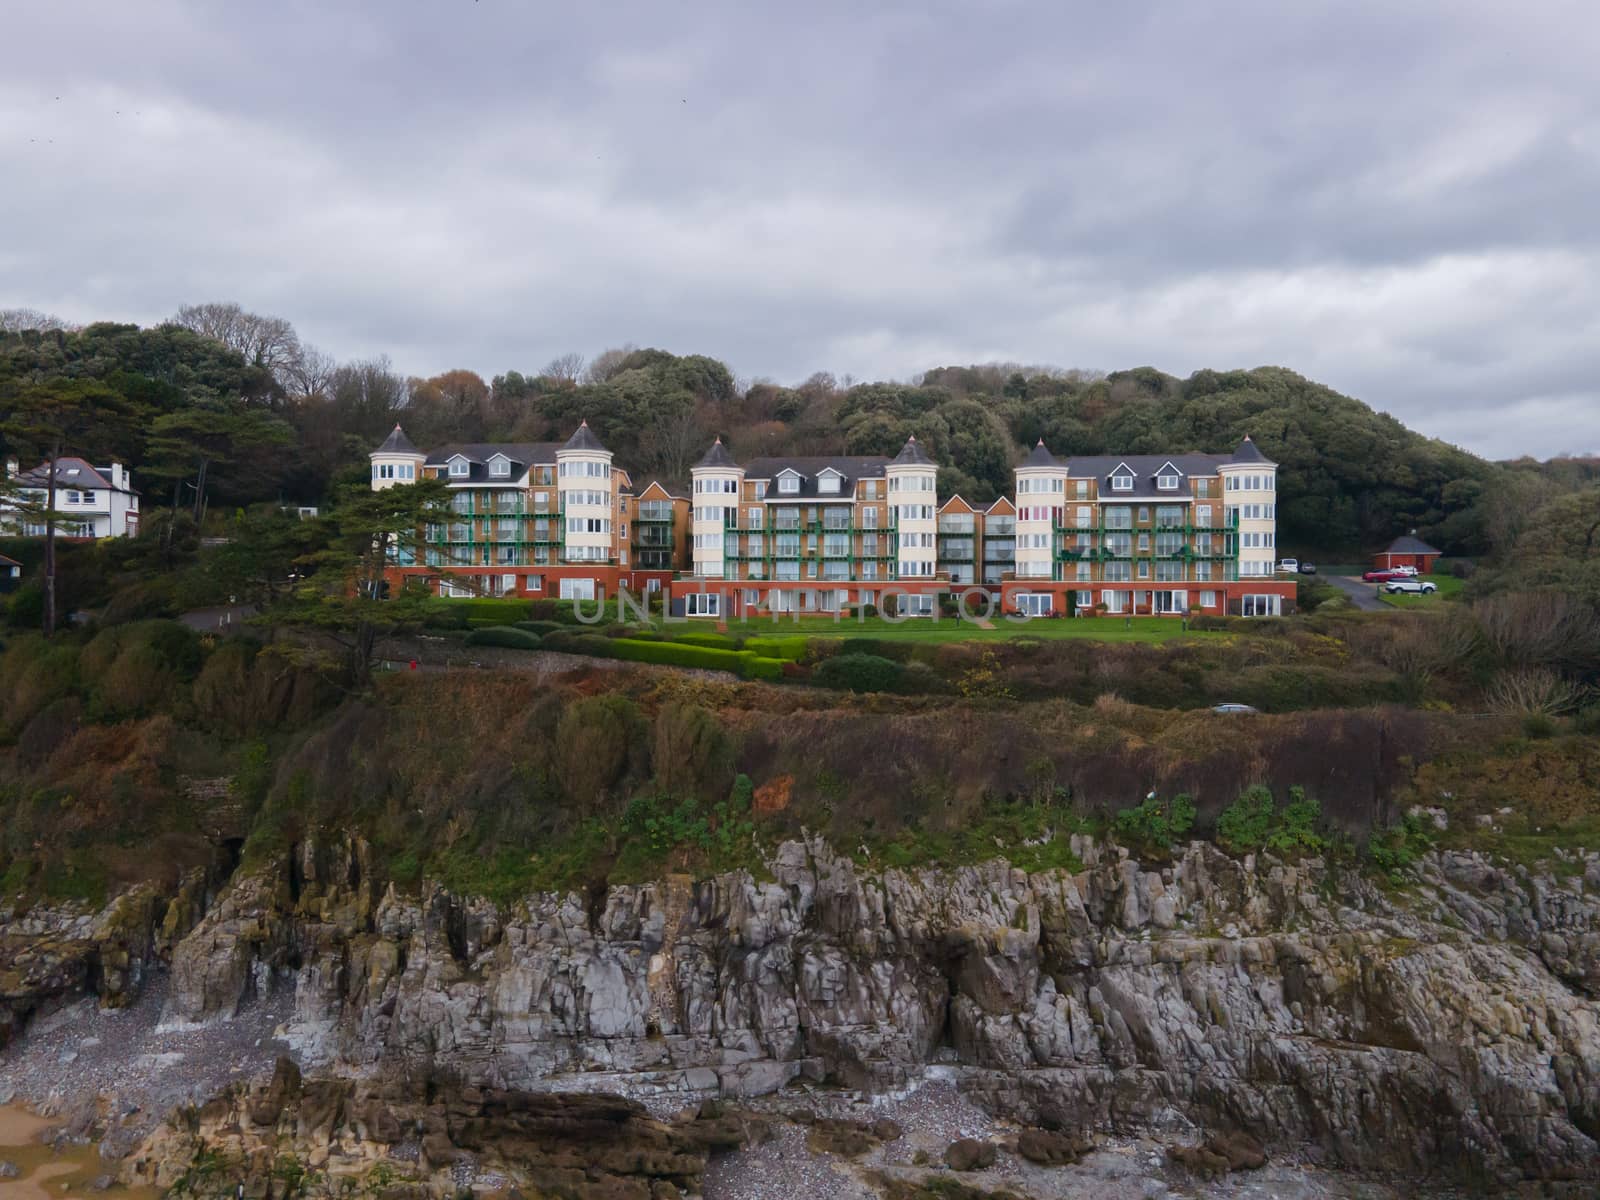 Luxury Apartments Sat Above The Cliffs Of Caswell Bay, Gower, Wales Uk. Stunning Coastal Views on a cloudy day. by WCLUK